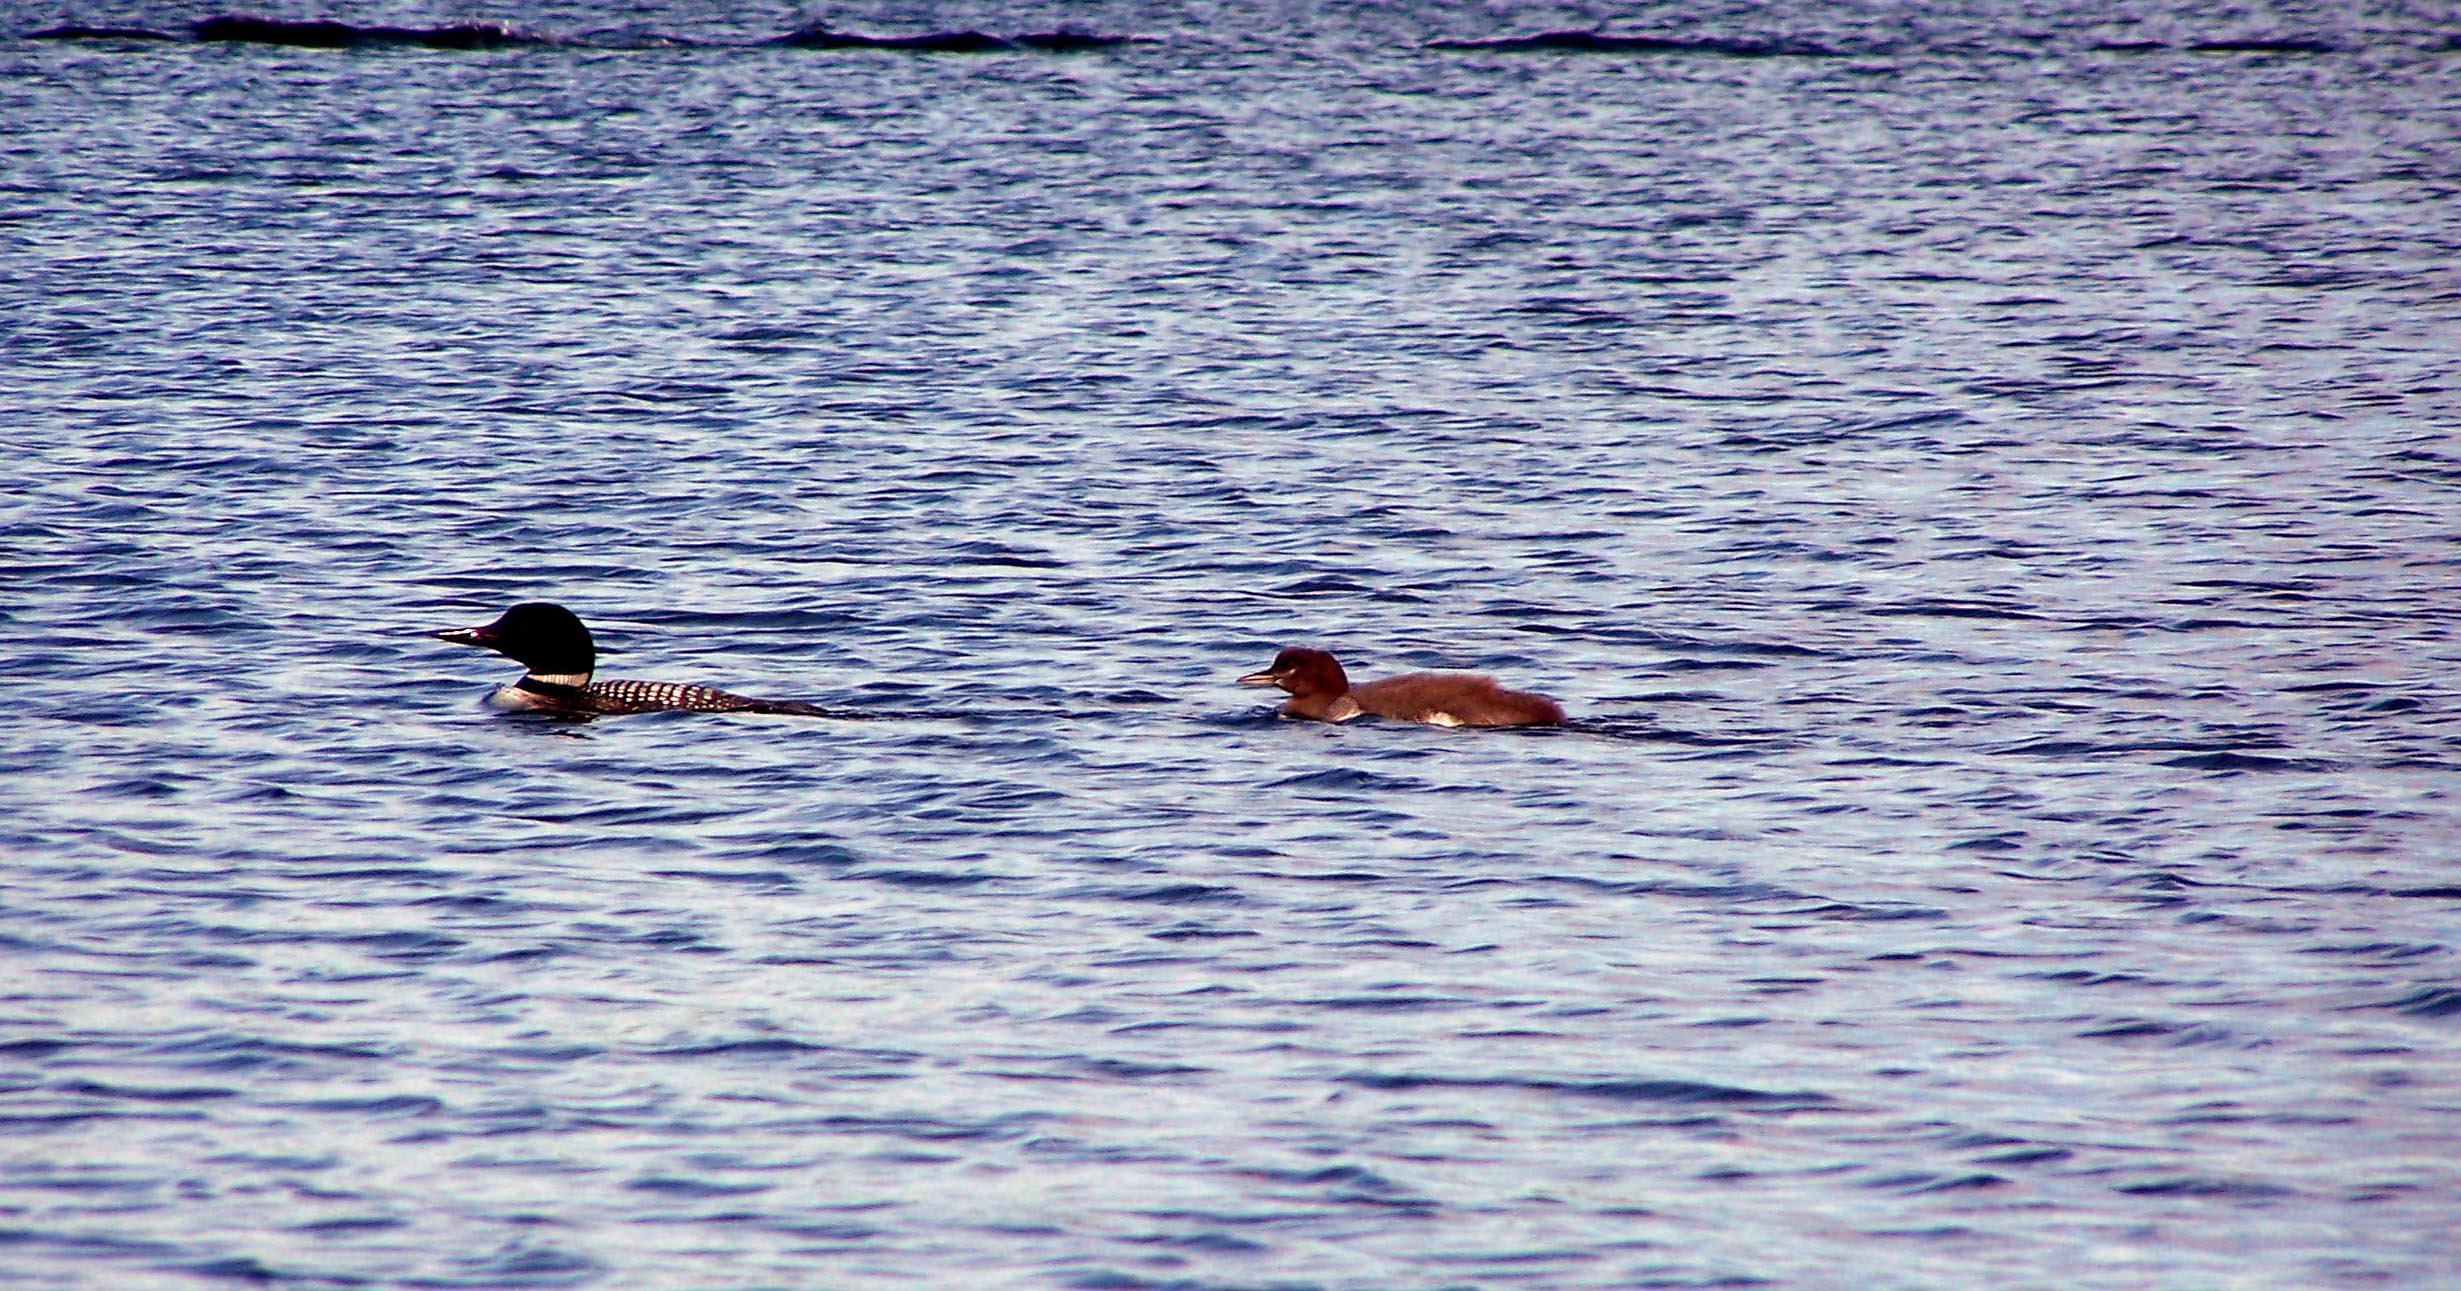 Loon and 1 of the babies about 6 weeks old